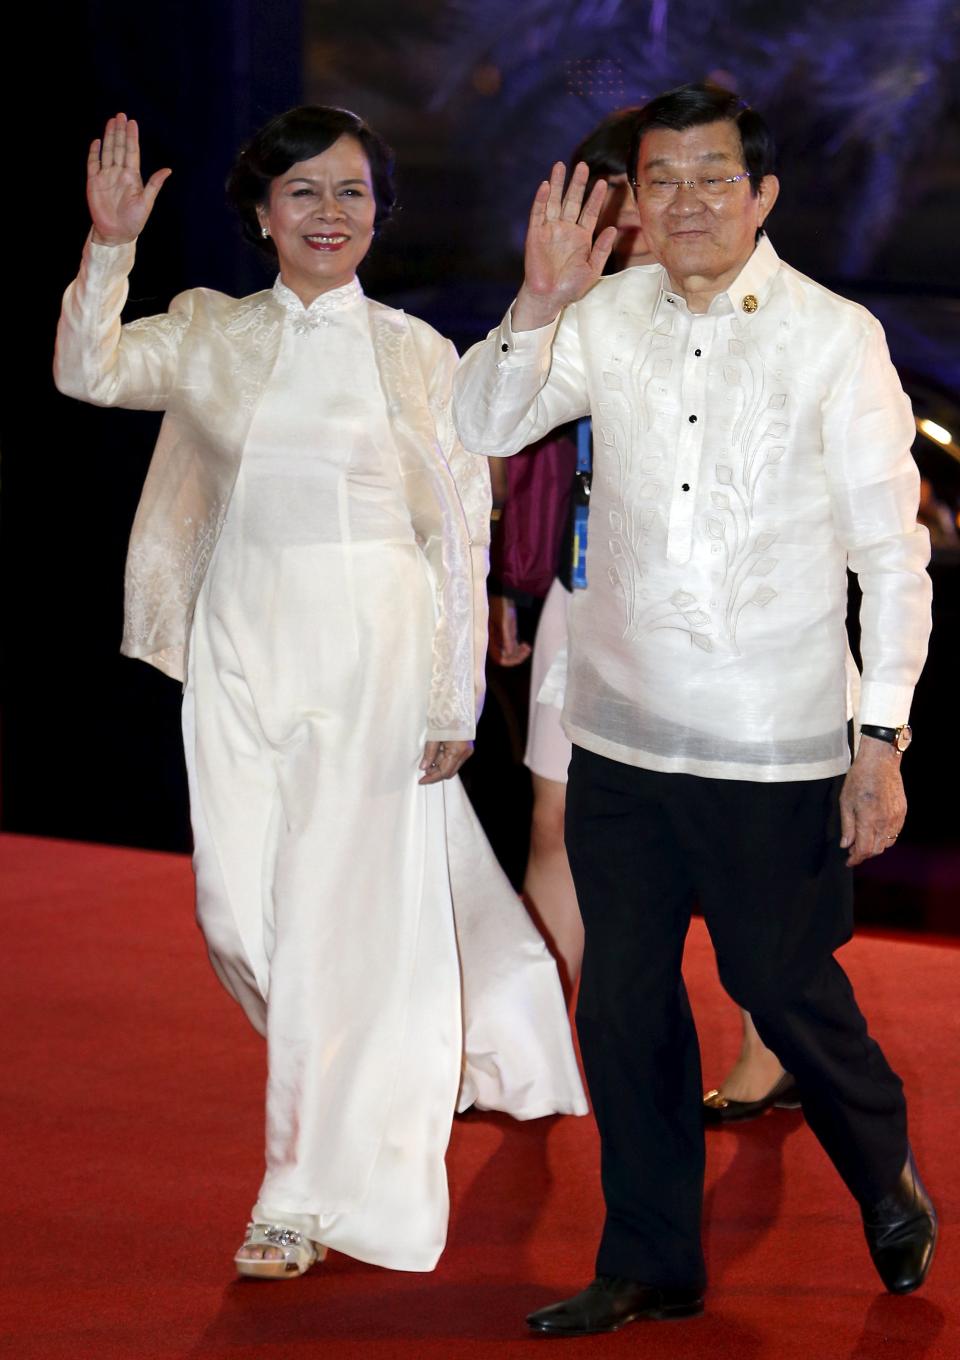 Vietnam's President Truong Tan Sang and his wife Mai Thi Hanh arrive for a welcome dinner during the Asia-Pacific Economic Cooperation (APEC) summit in the capital city of Manila